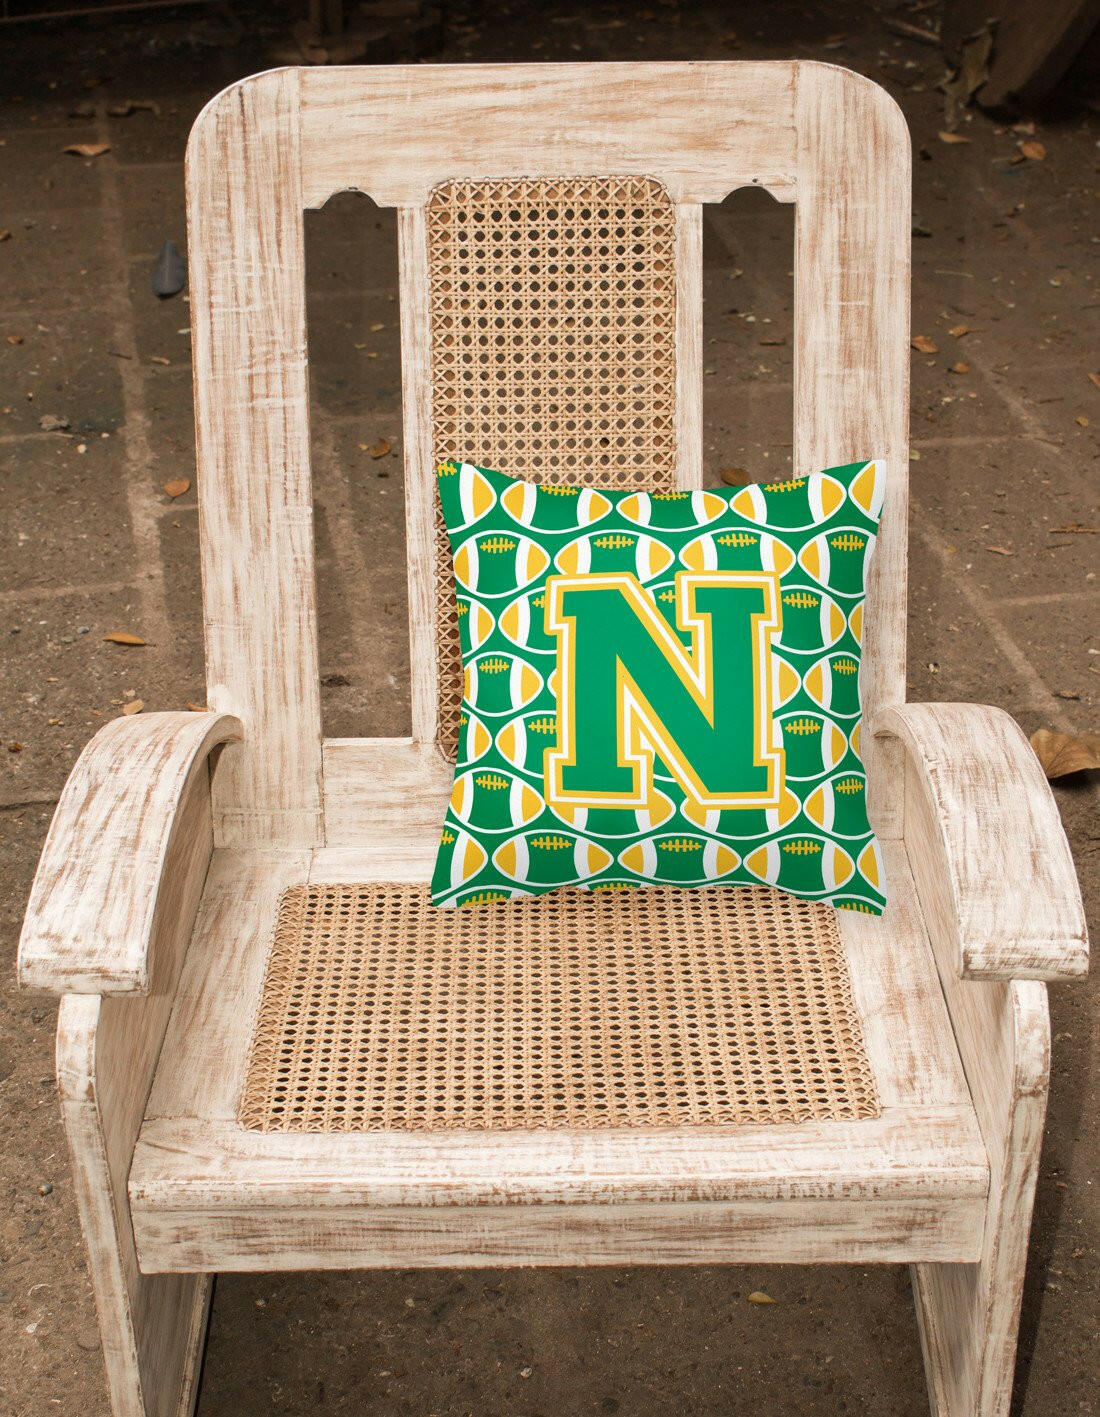 Letter N Football Green and Gold Fabric Decorative Pillow CJ1069-NPW1414 by Caroline's Treasures